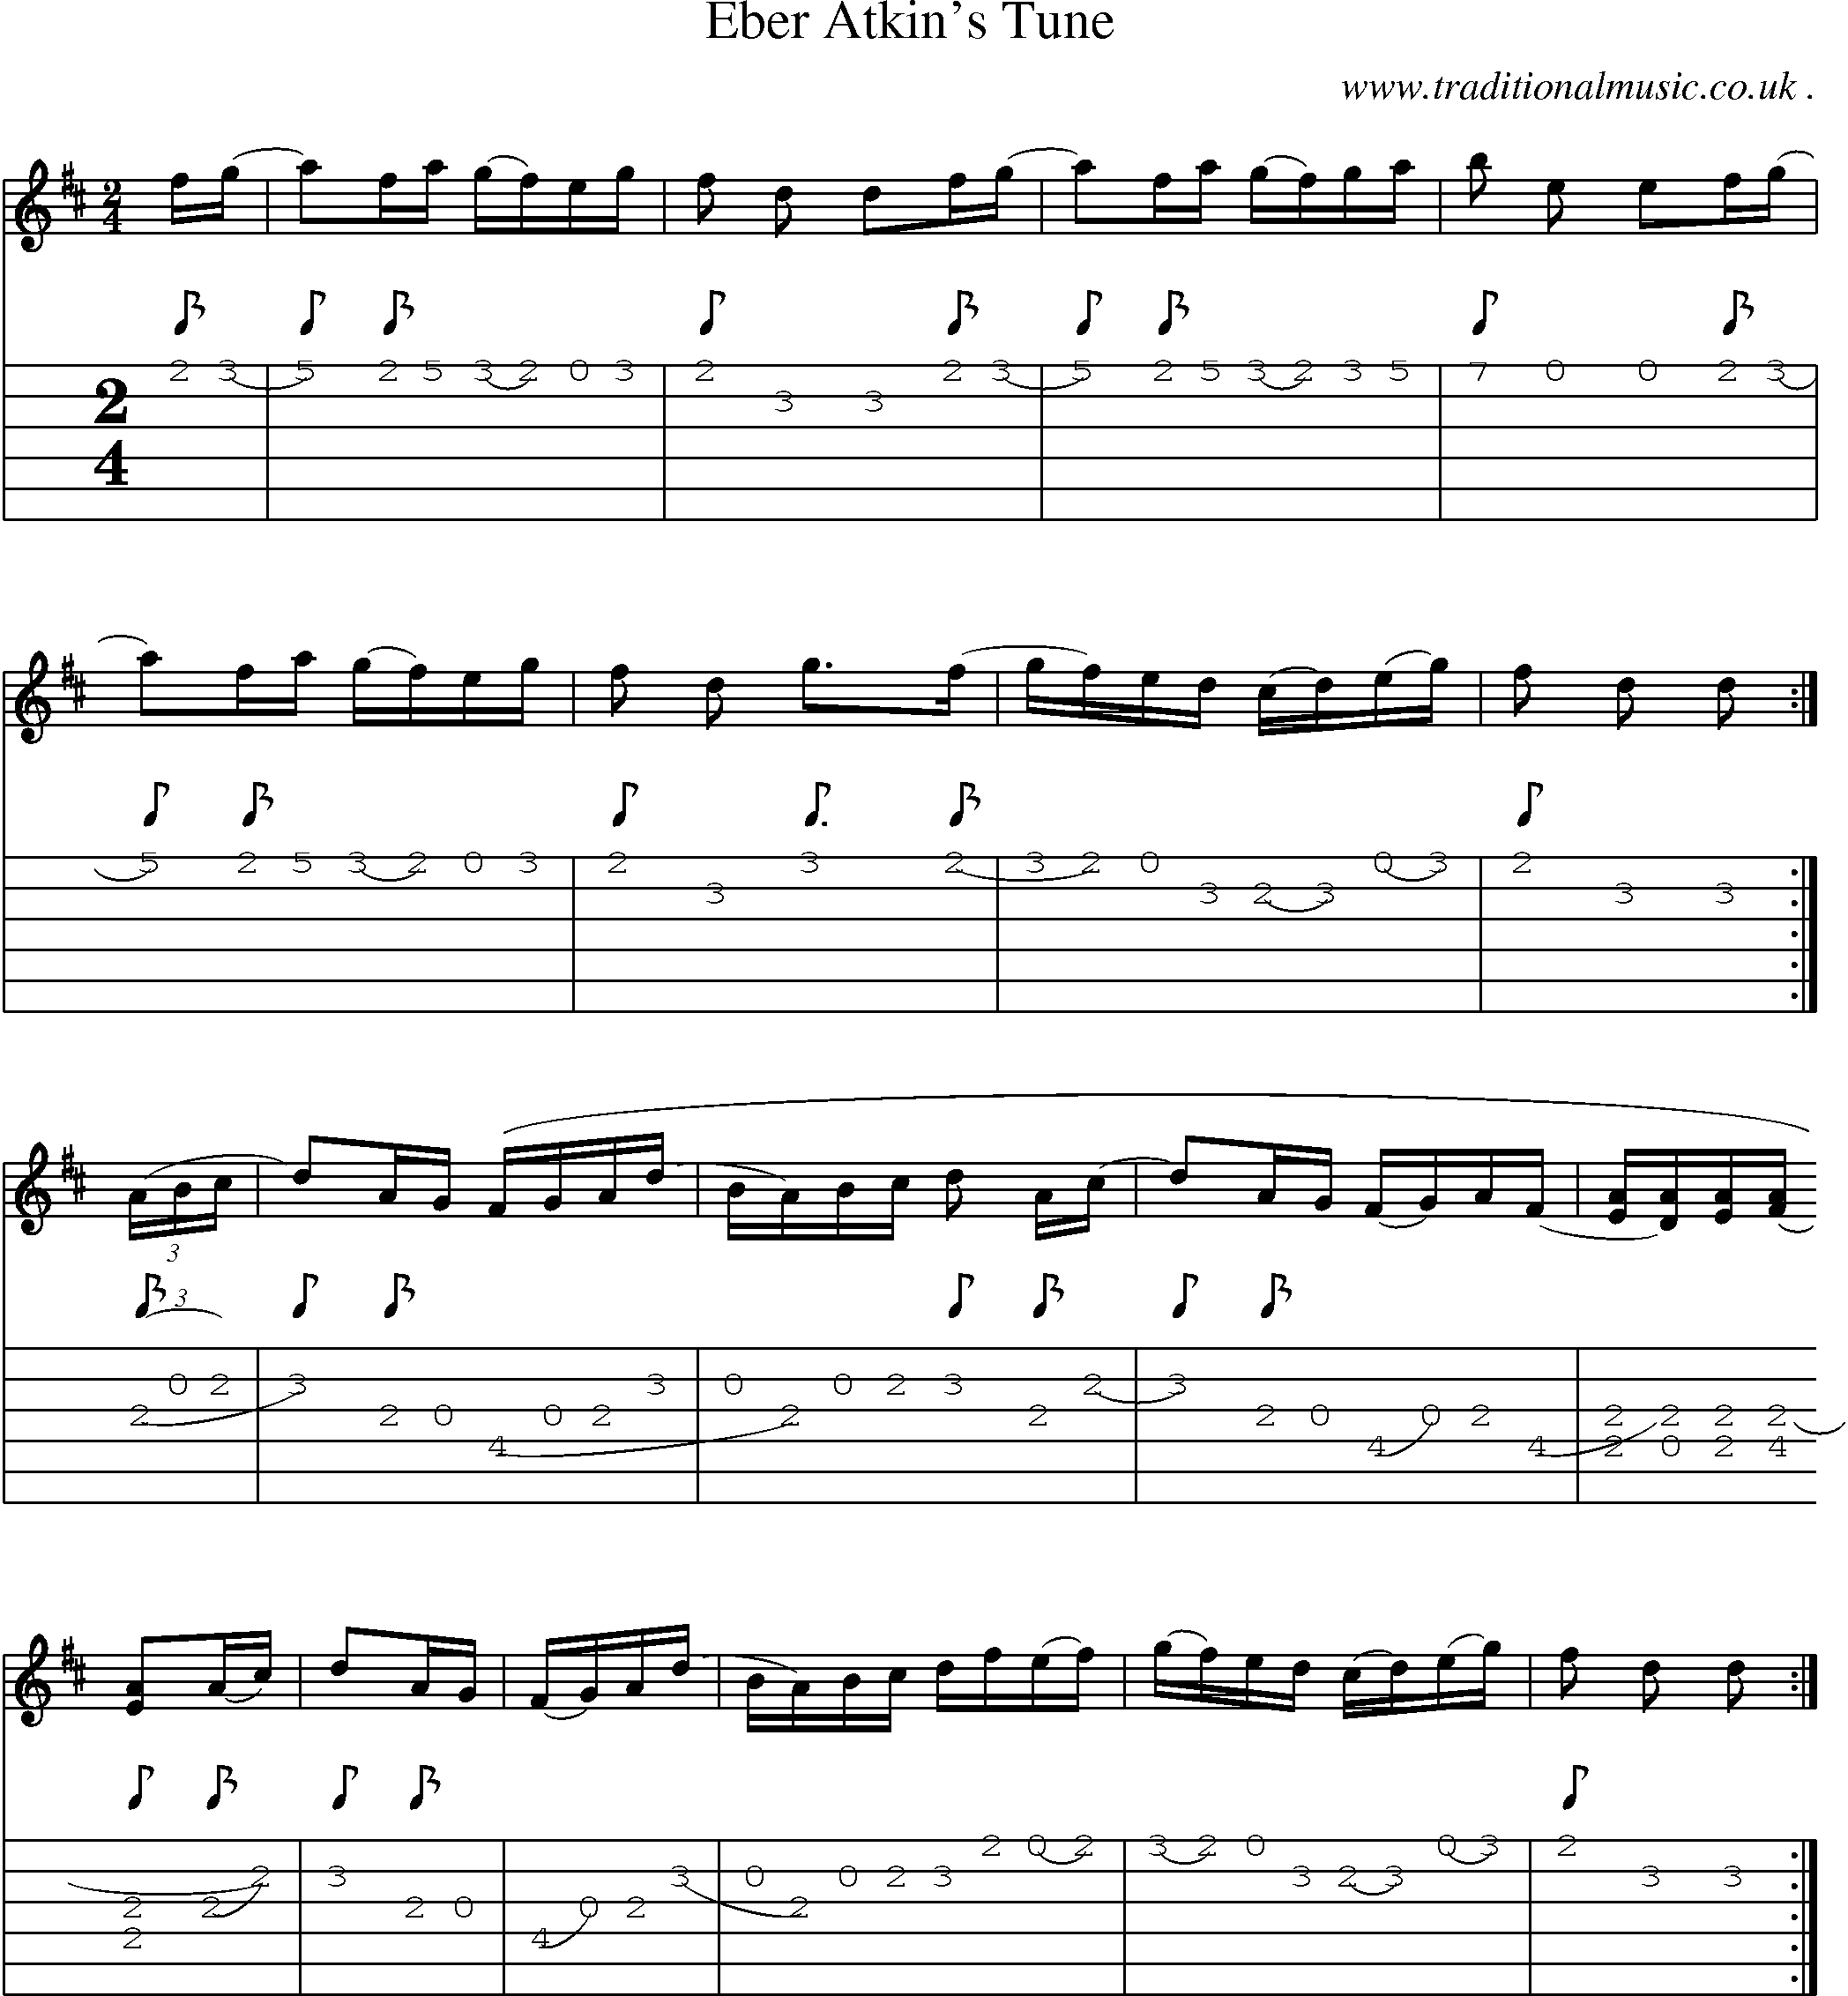 Music Score and Guitar Tabs for Eber Atkins Tune